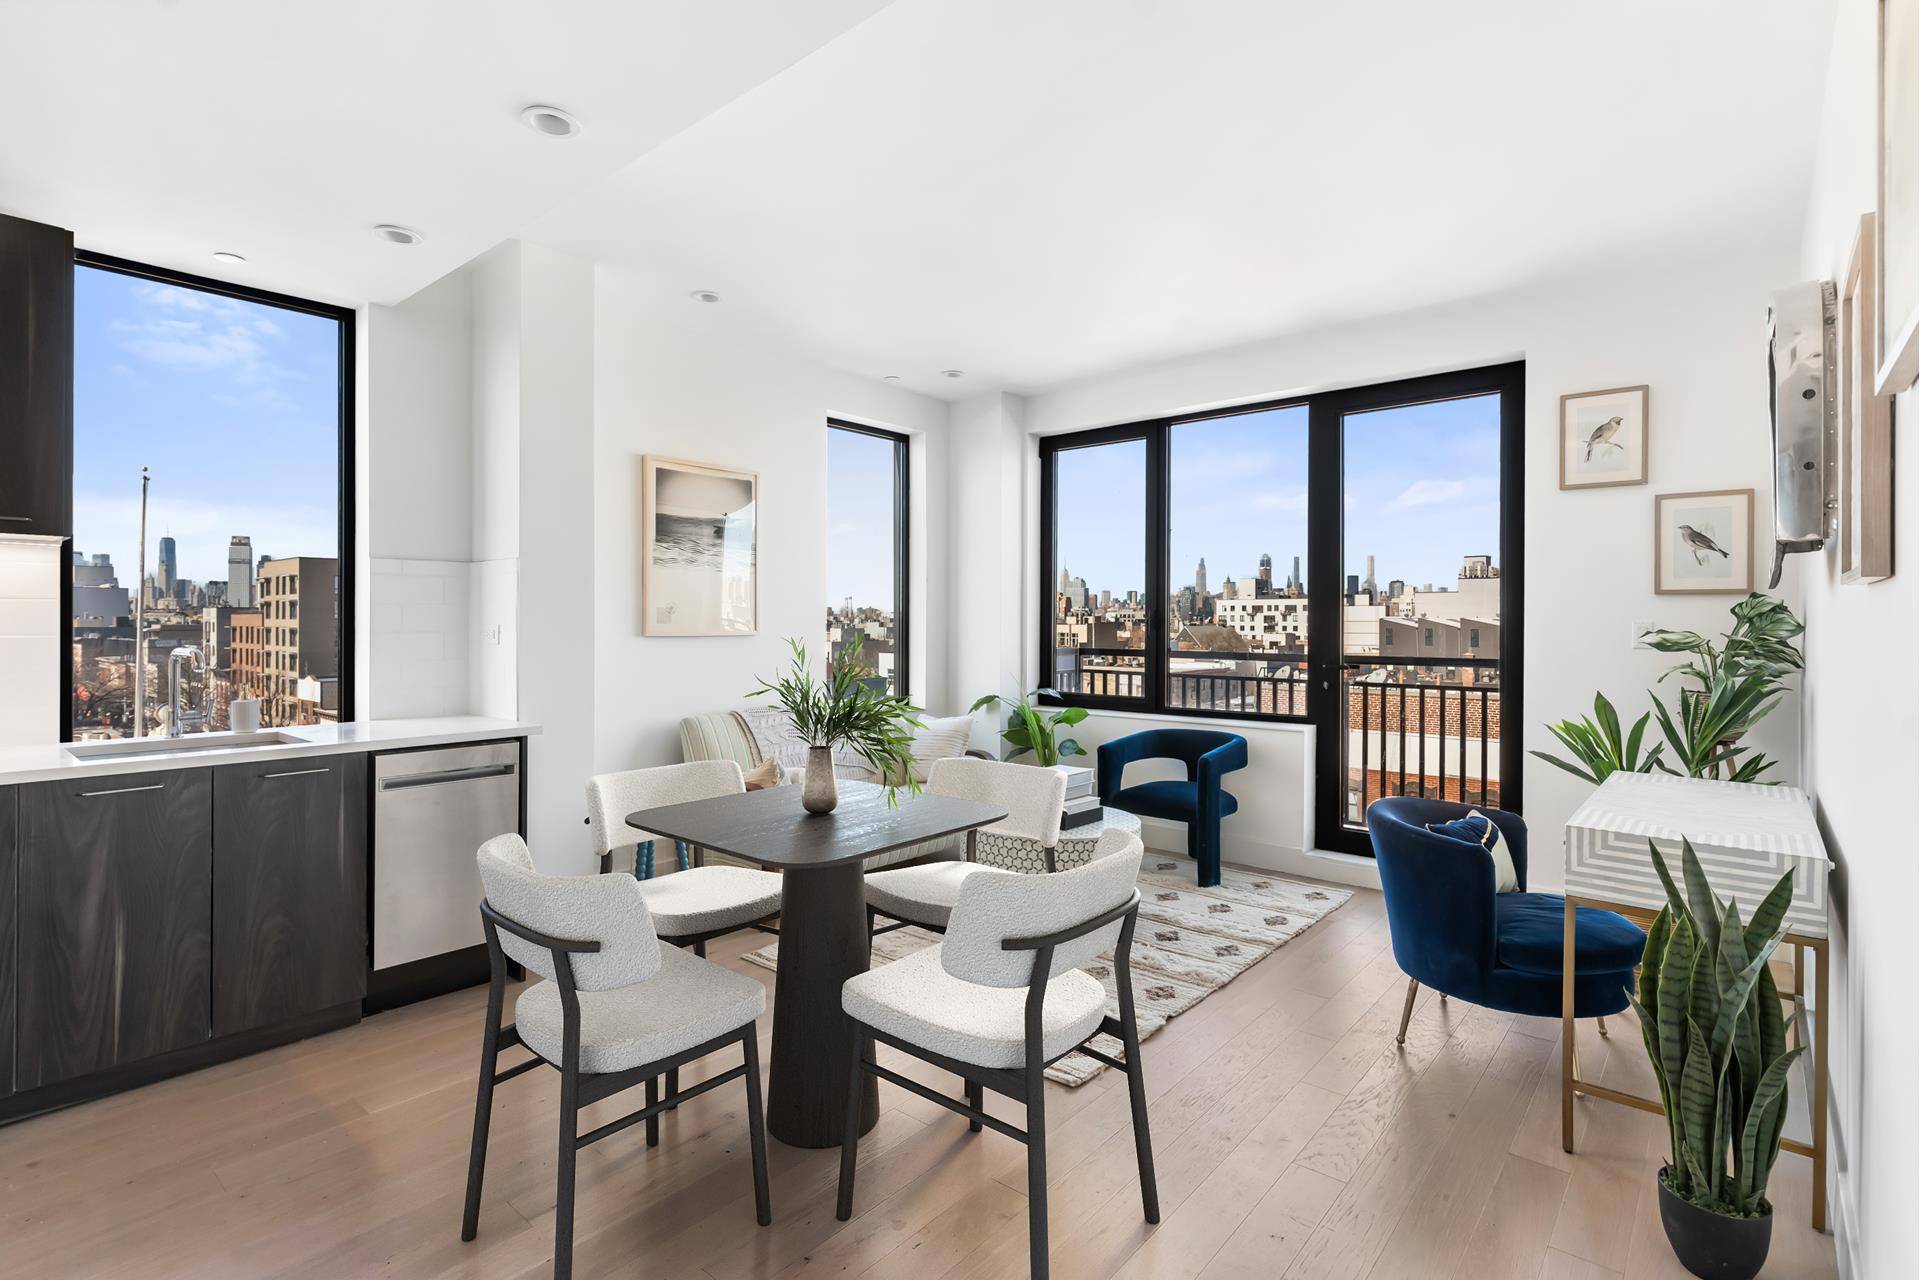 Introducing 738 Grand Street, an exquisite new condominium available for purchase in the vibrant neighborhood of East Williamsburg.